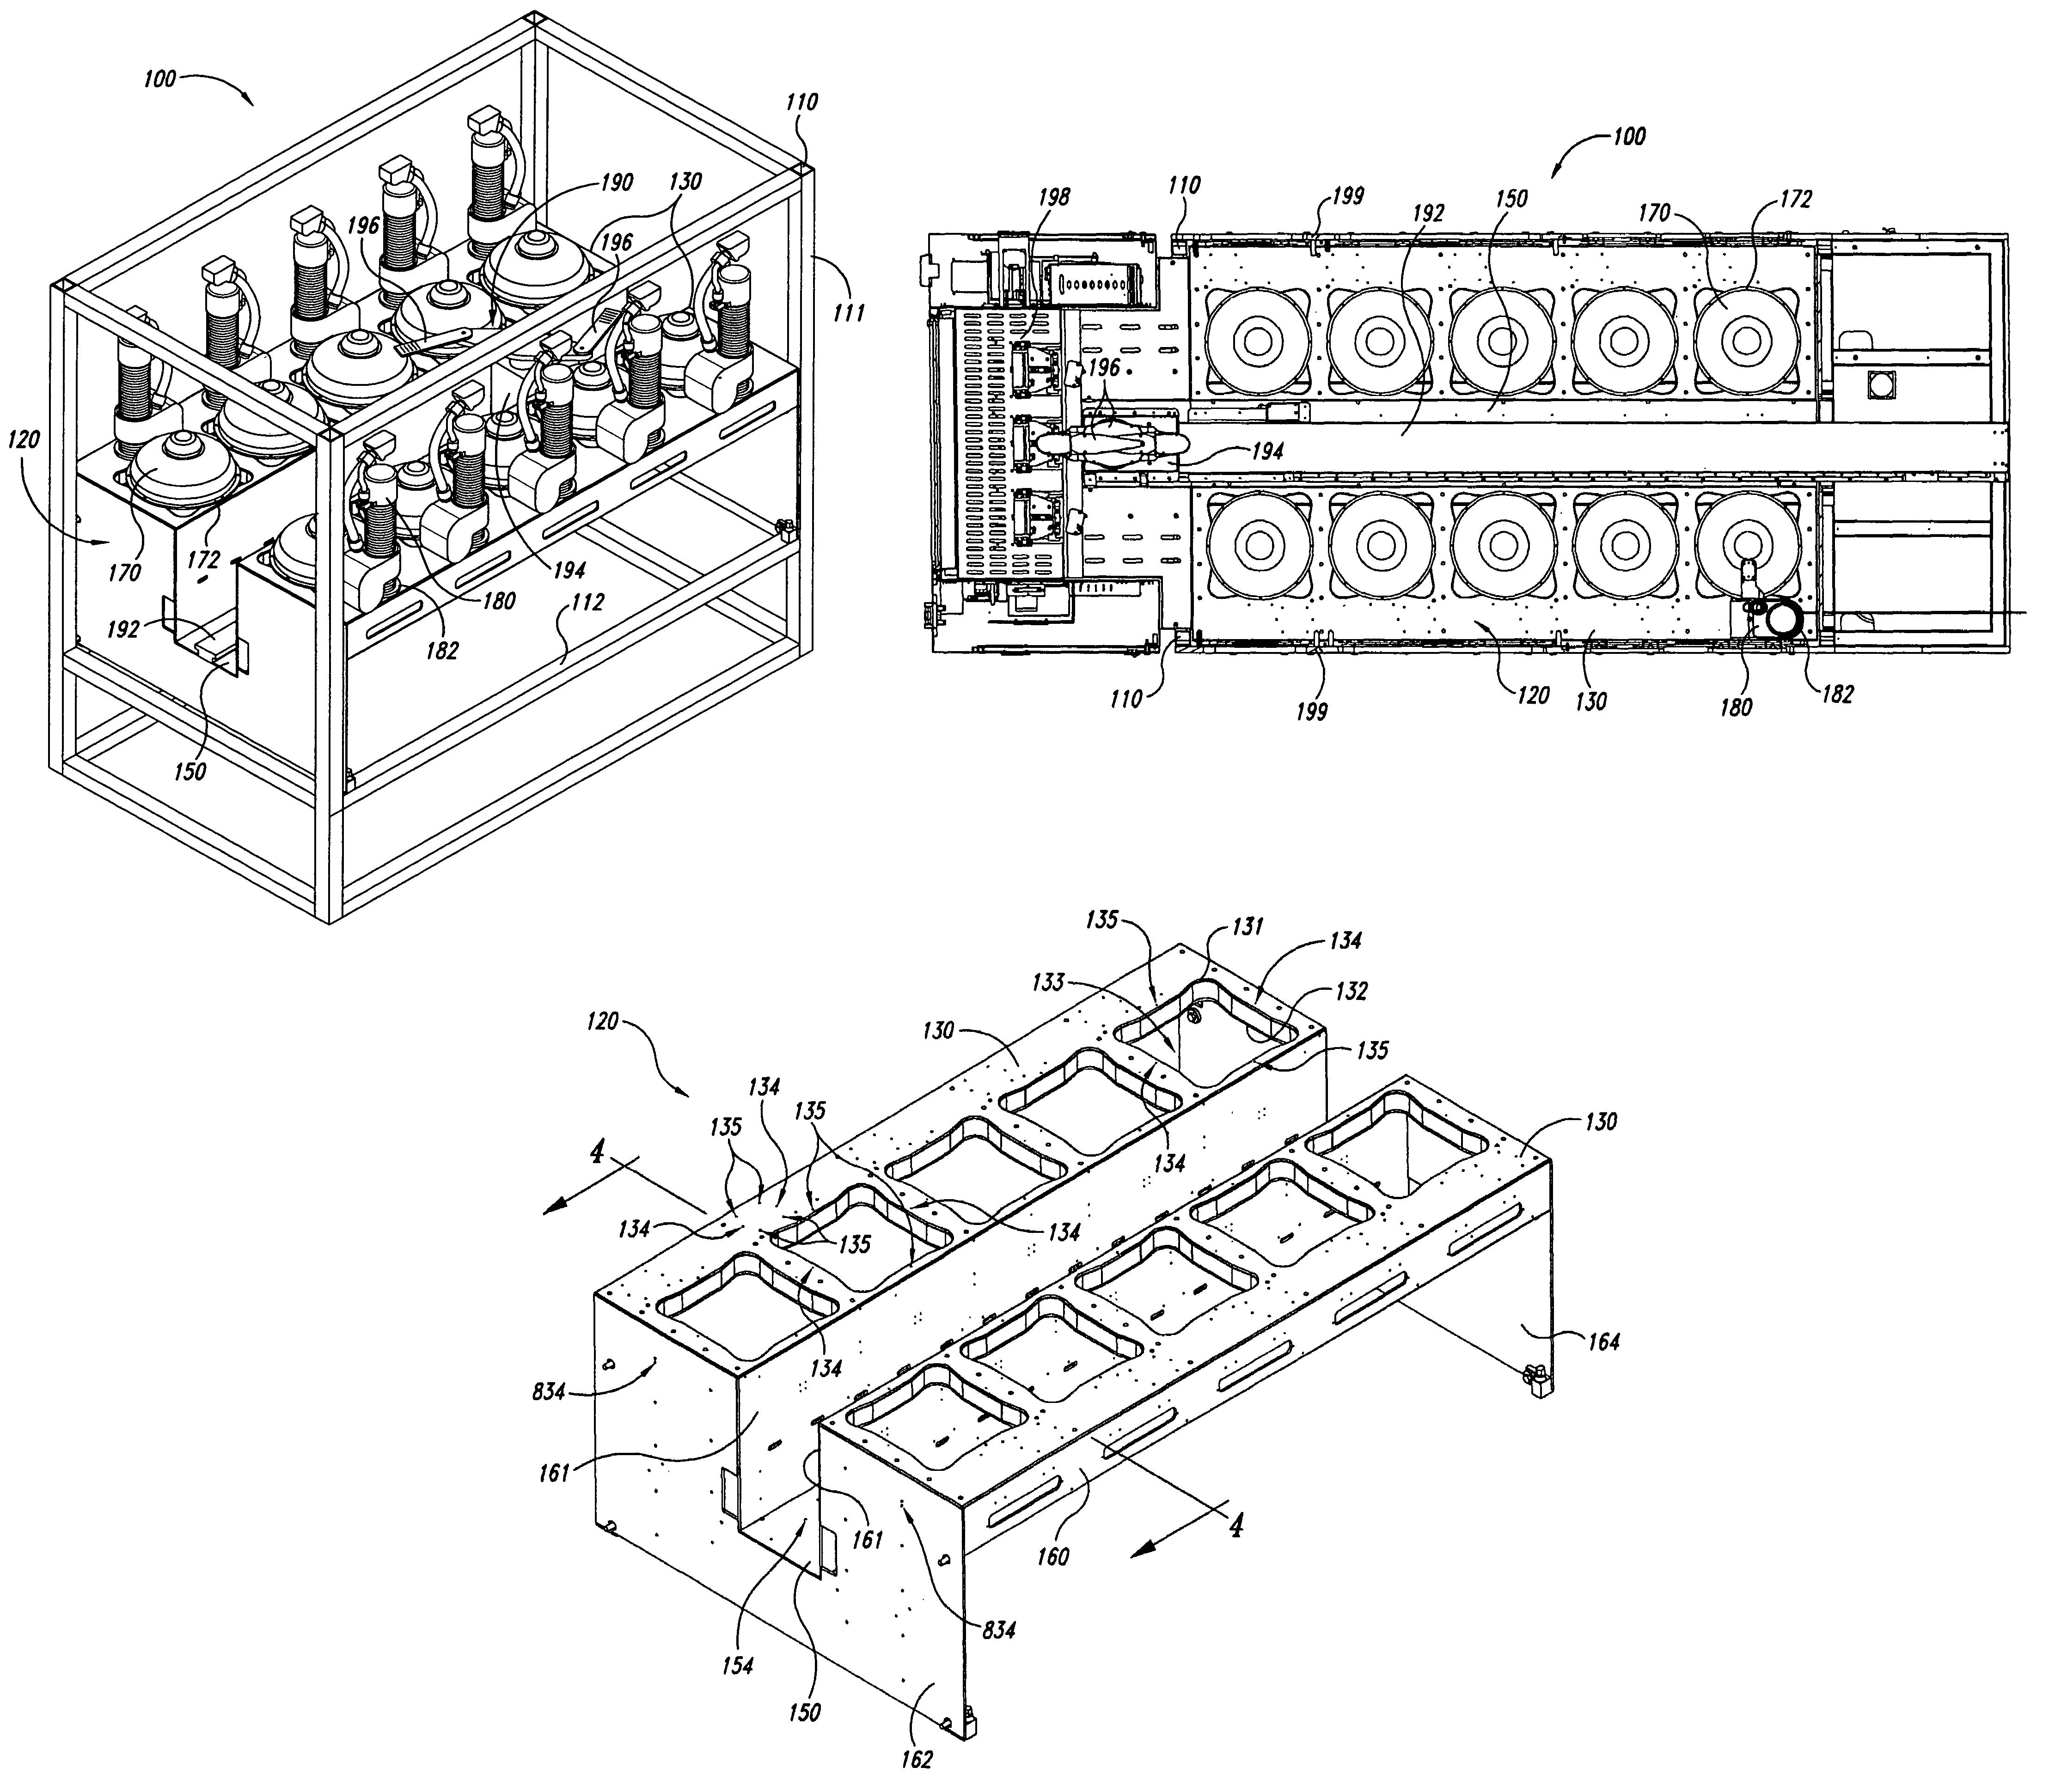 Integrated tool with interchangeable wet processing components for processing microfeature workpieces